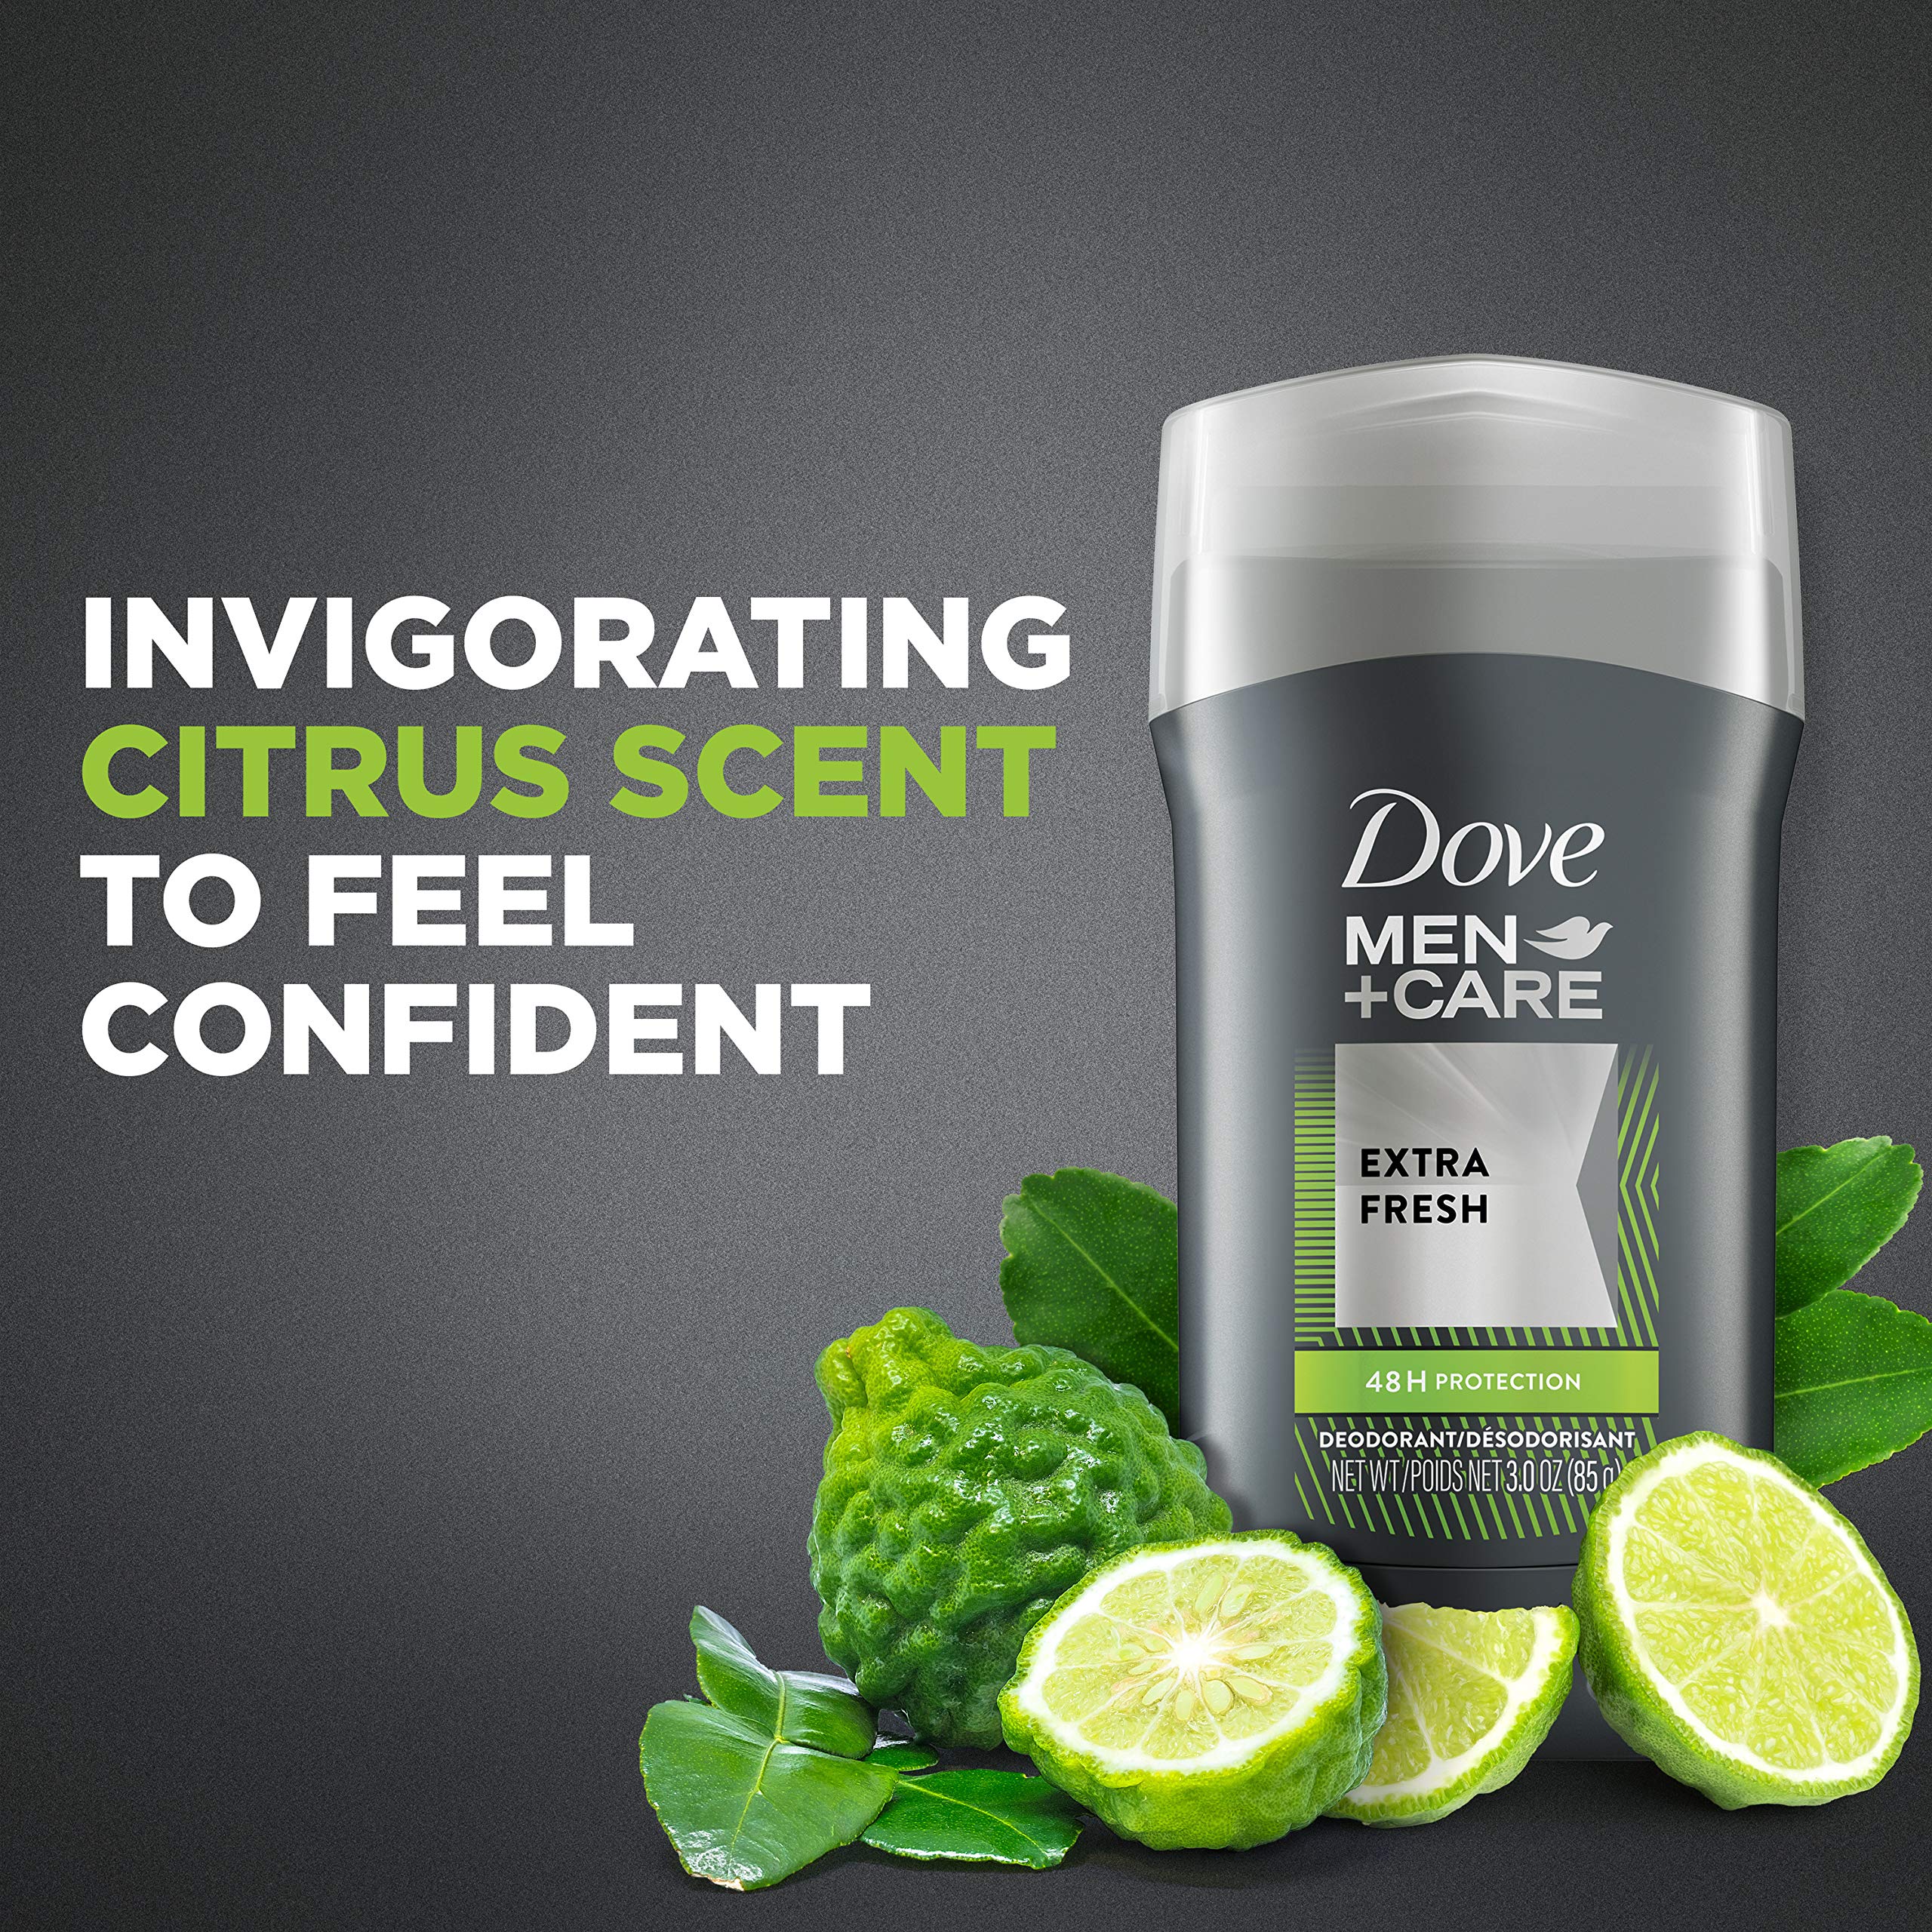 Dove Men+Care Deodorant Stick Aluminum-free formula with 48-Hour Protection Extra Fresh Deodorant for men with Vitamin E and Triple Action Moisturizer 3 oz